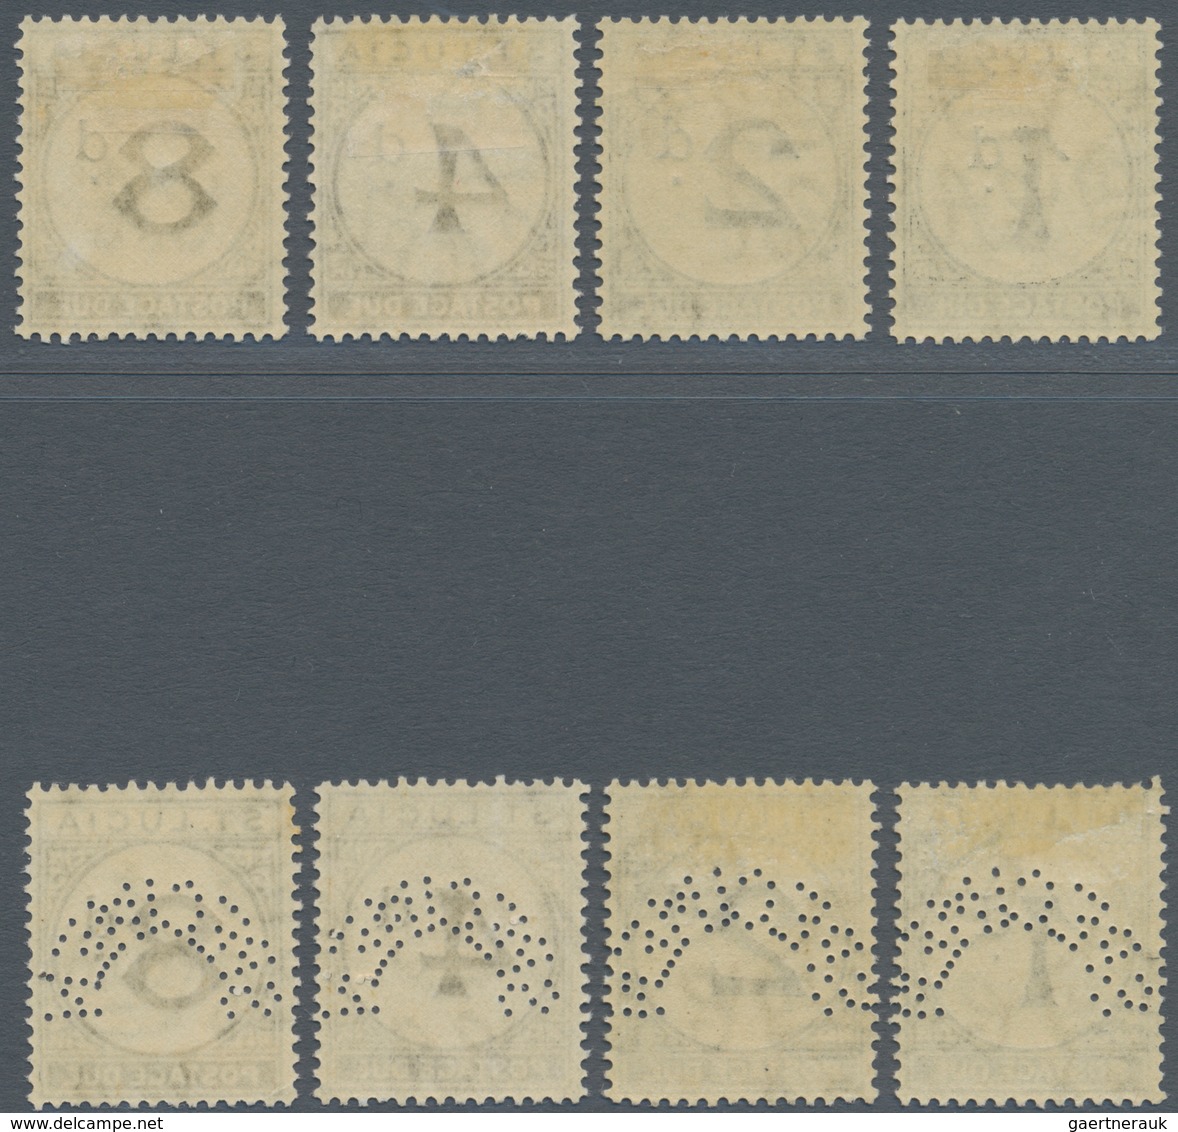 St. Lucia - Portomarken: 1933/1947, Postage Dues Complete Set Of Four And Additional The Set Perf. ' - St.Lucia (1979-...)